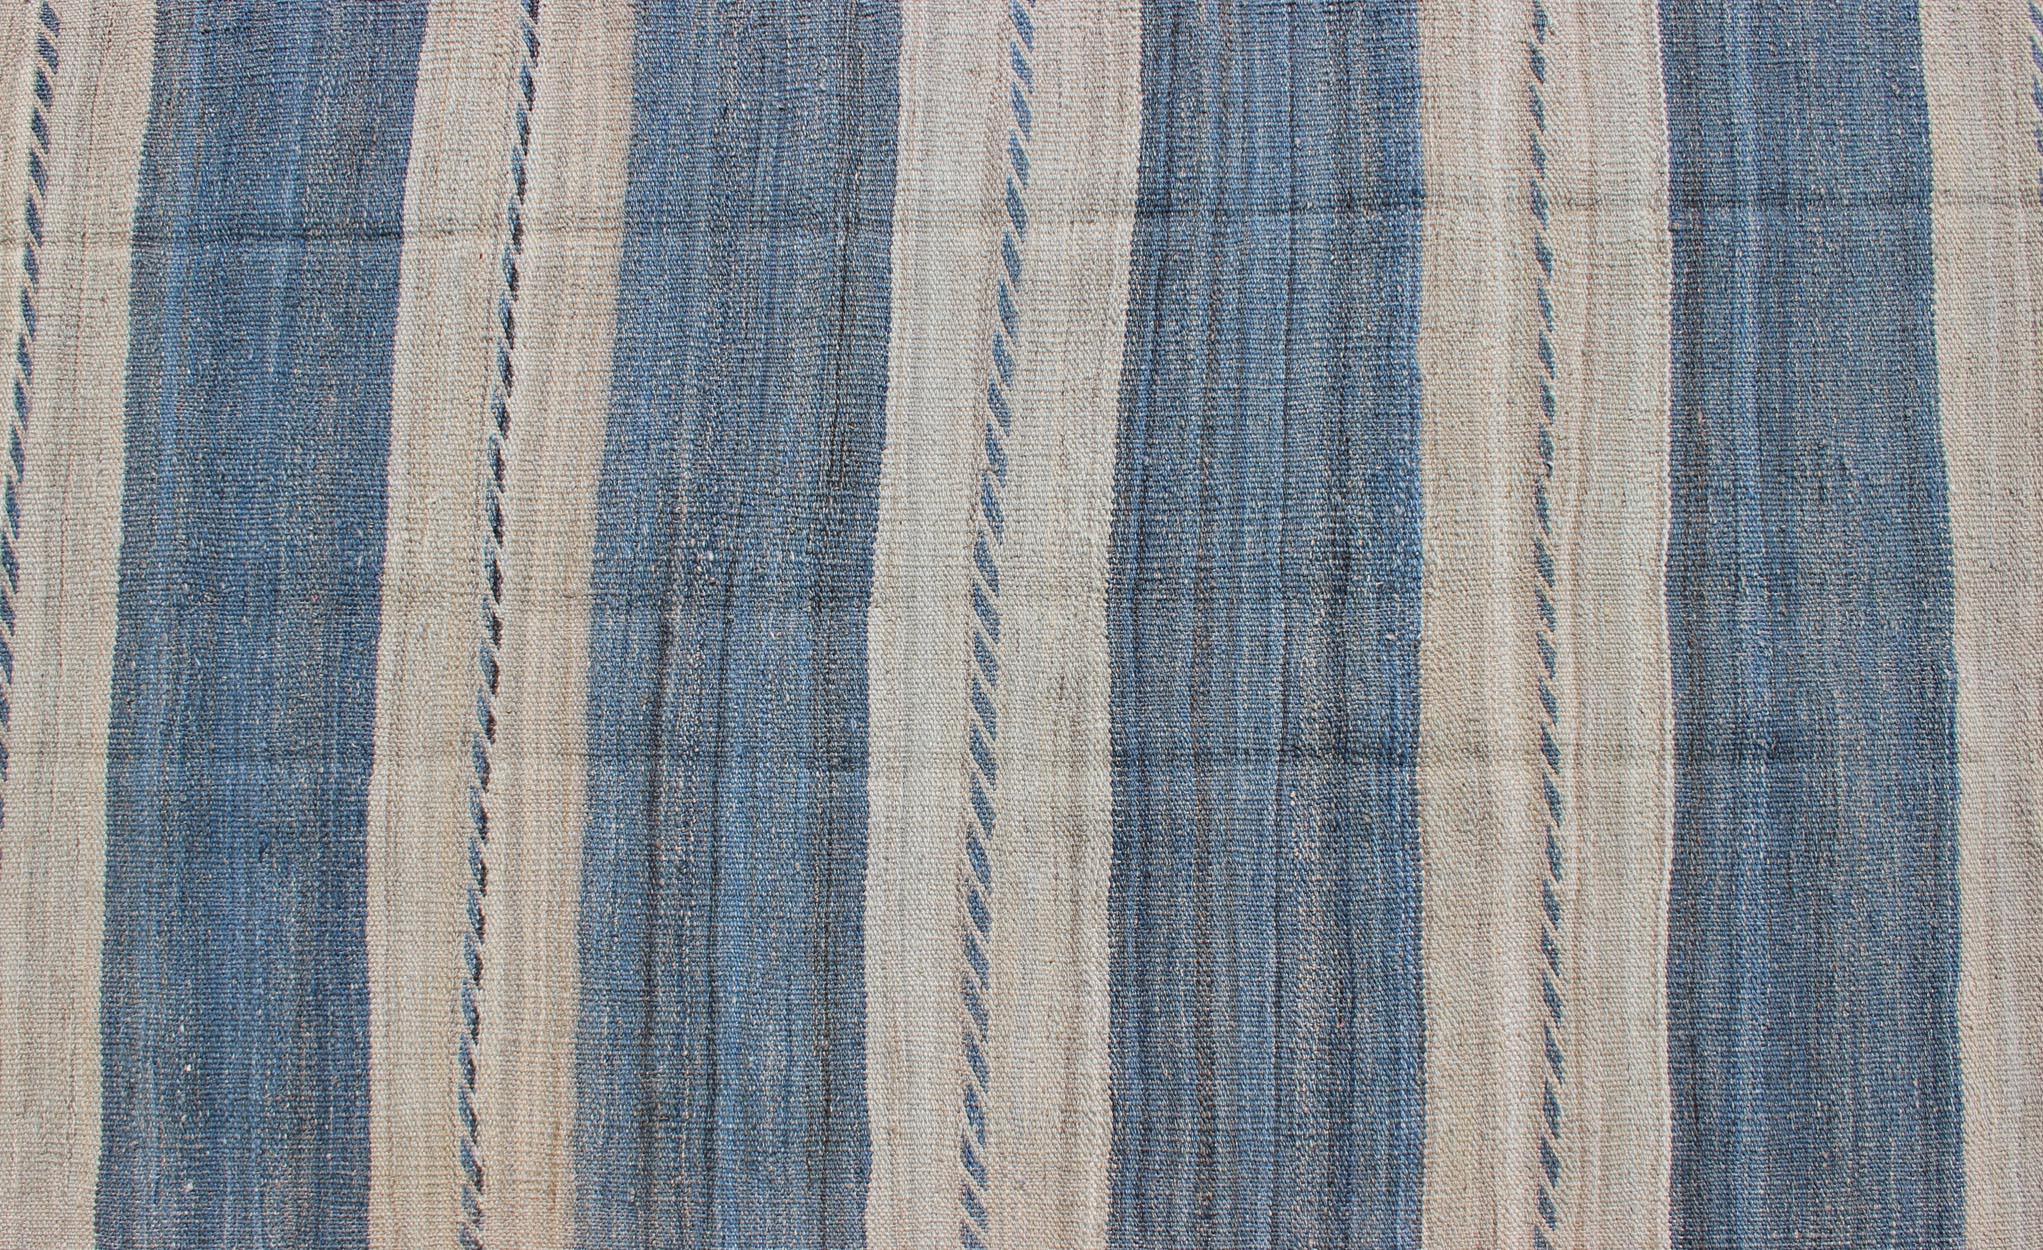 Afghan Flat-Weave Modern Kilim Rug with Stripes in Shades of Blue and Ivory